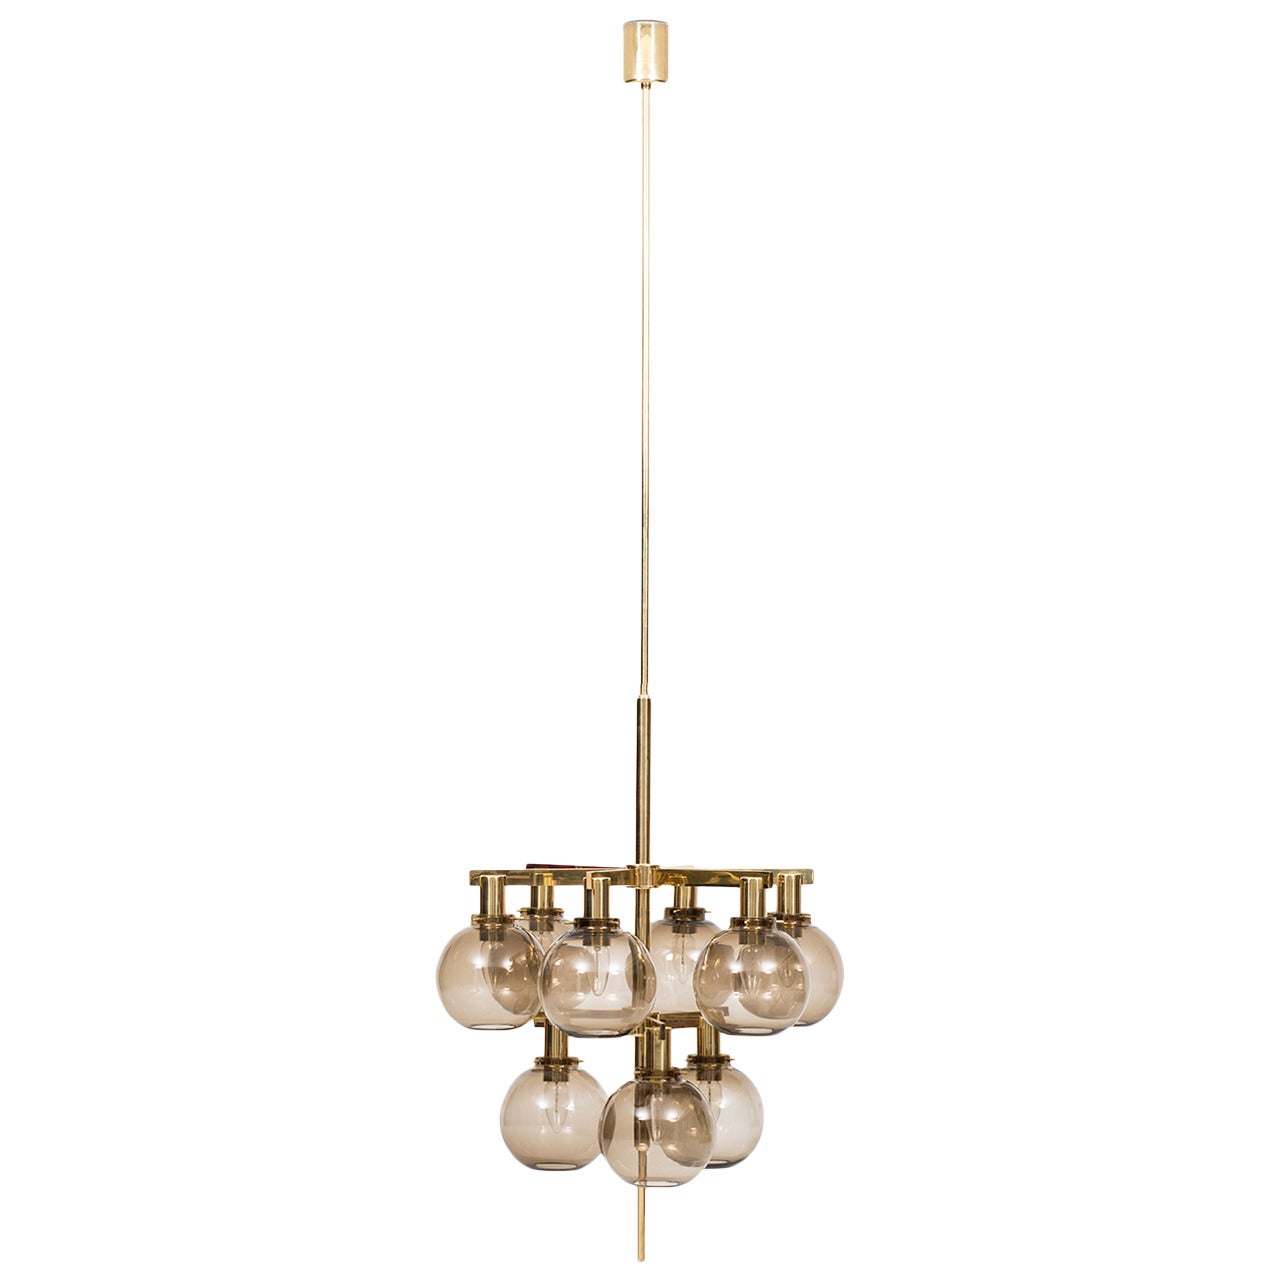 Hans-Agne Jakobsson ceiling lamp in brass and smoked glass